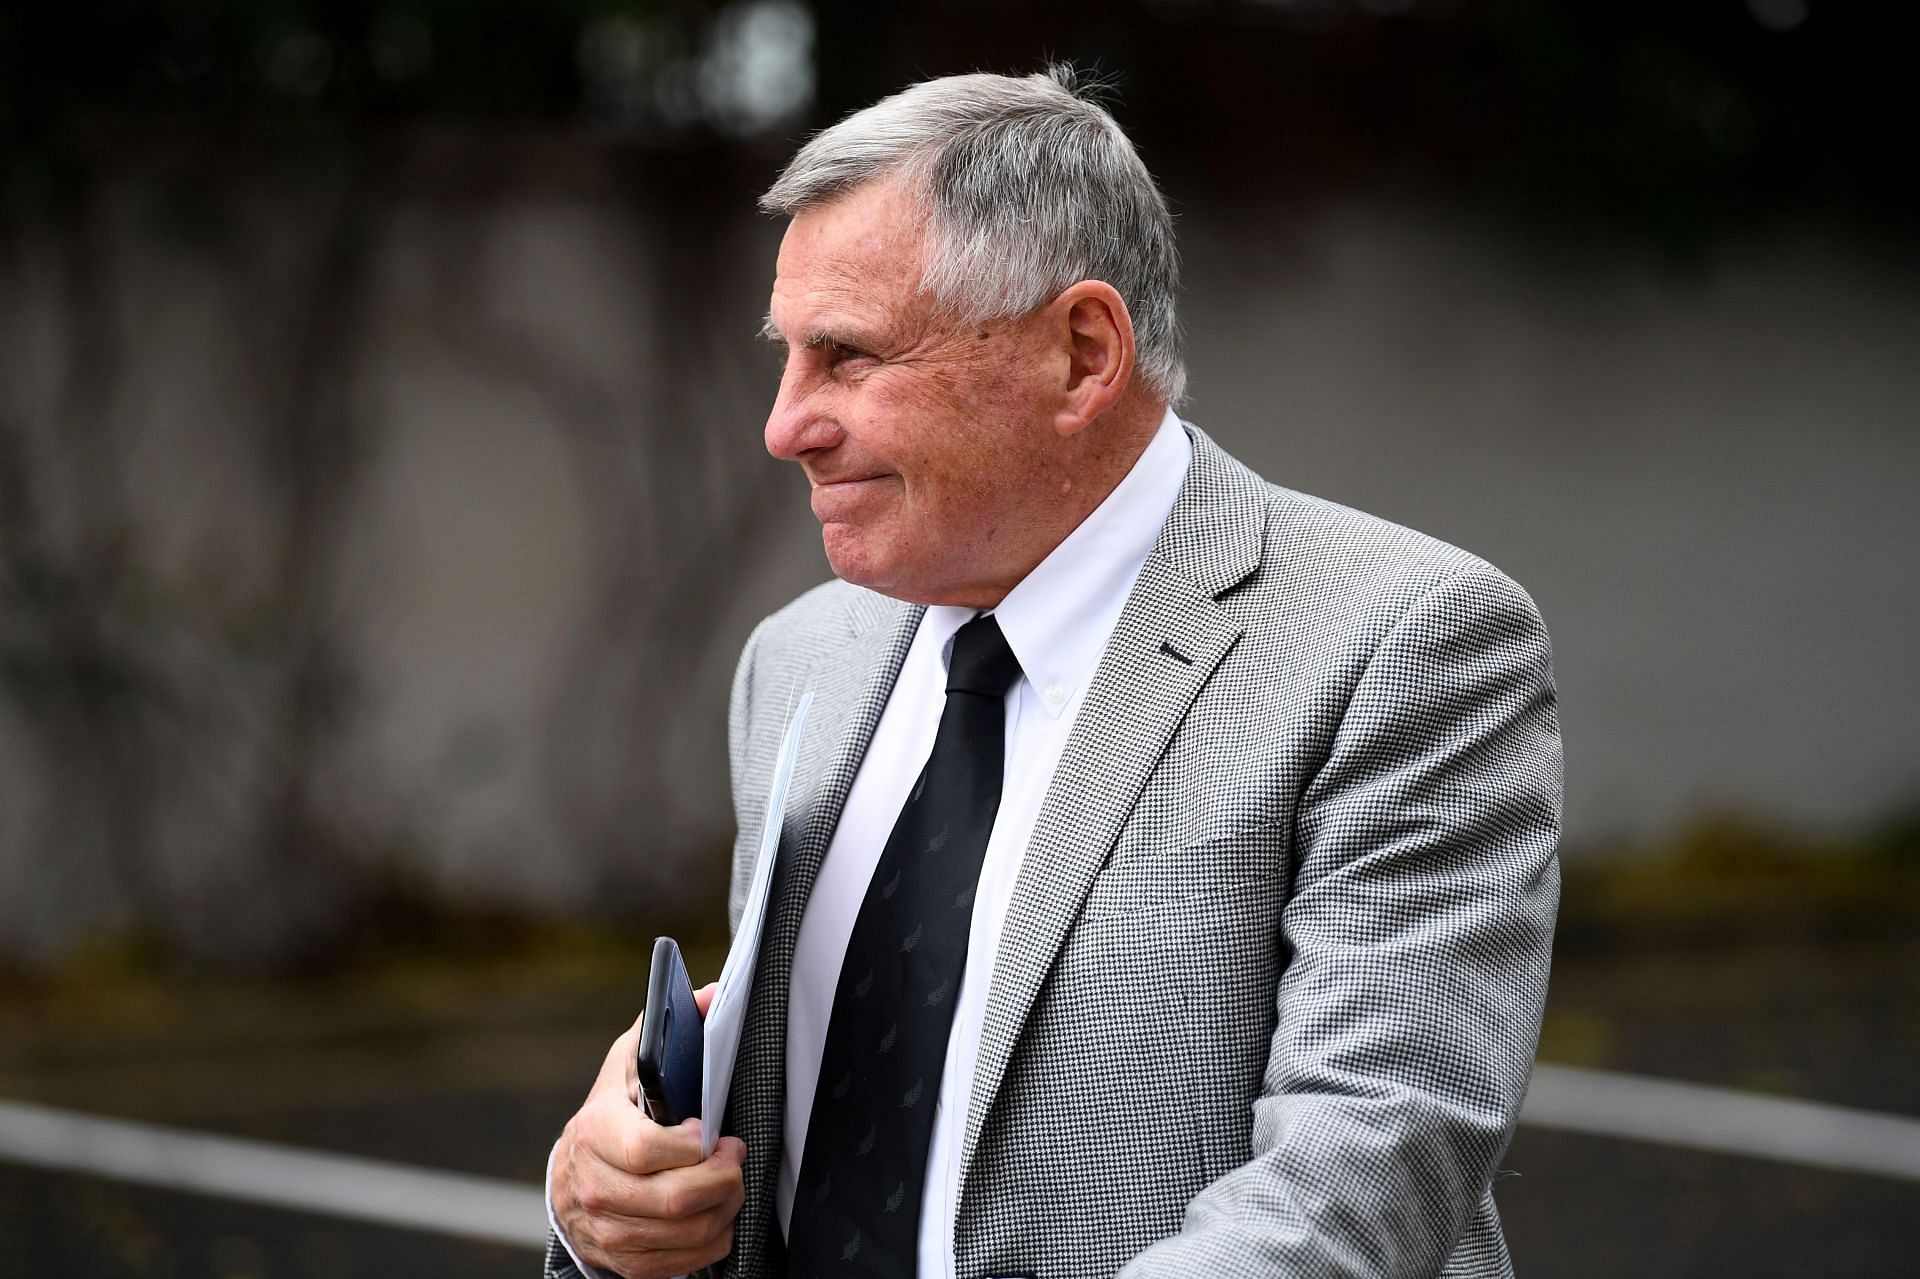  Former All Blacks coach John attends the funeral service for Andy Haden at Eden Park on August 03, 2020, in Auckland, New Zealand. (Photo by Hannah Peters/Getty Images)